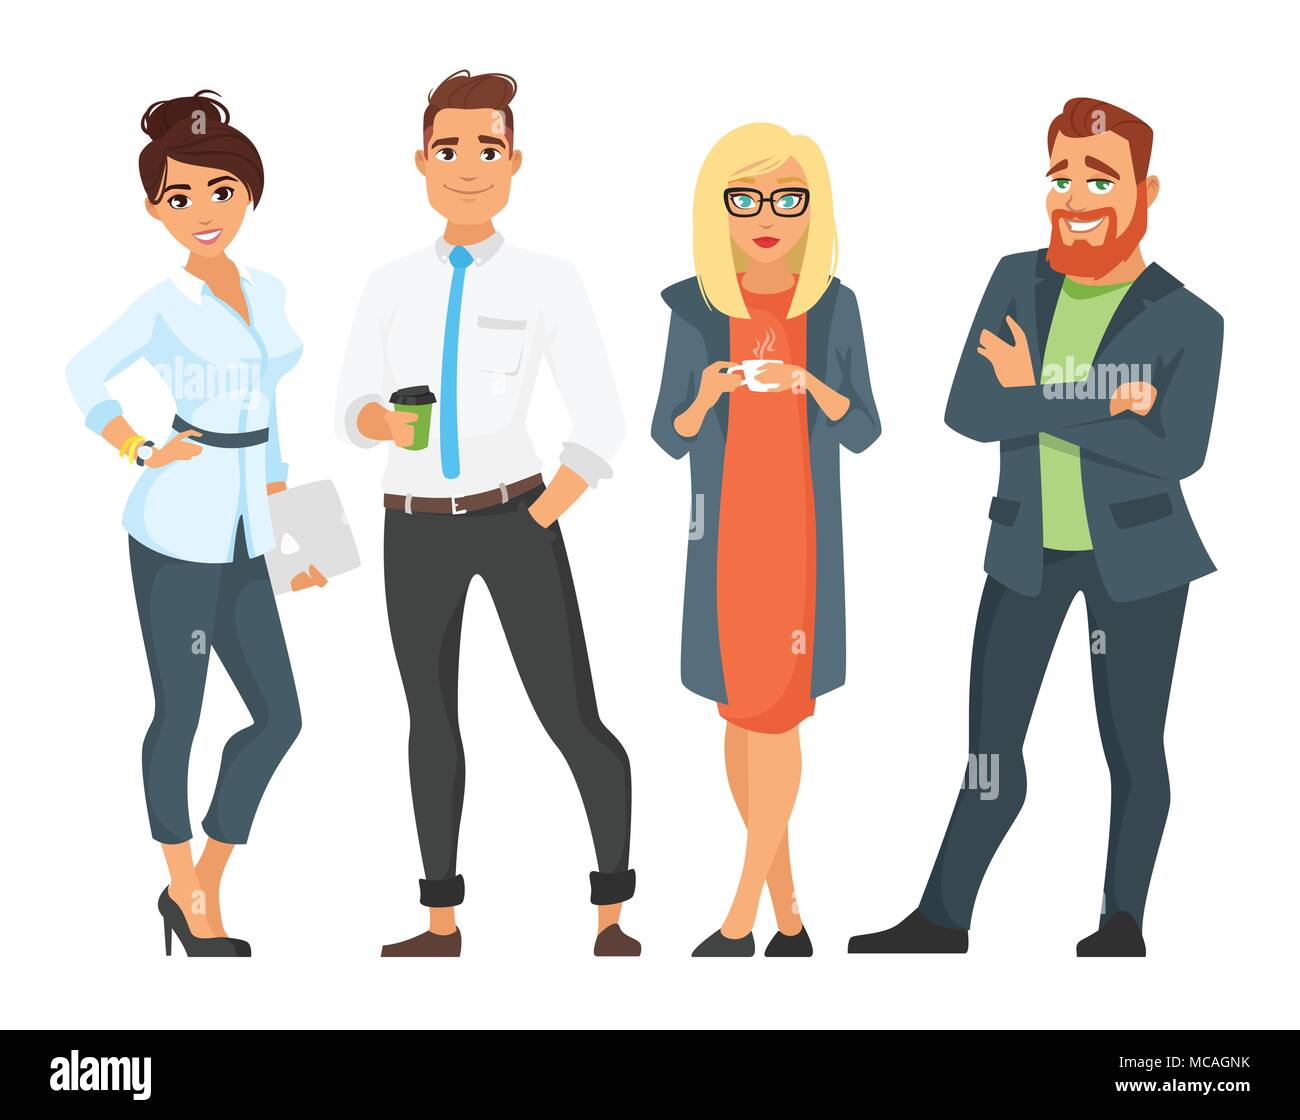 Vector cartoon style illustration of professional businessman characters man and woman. Isolated on white background. Stock Vector